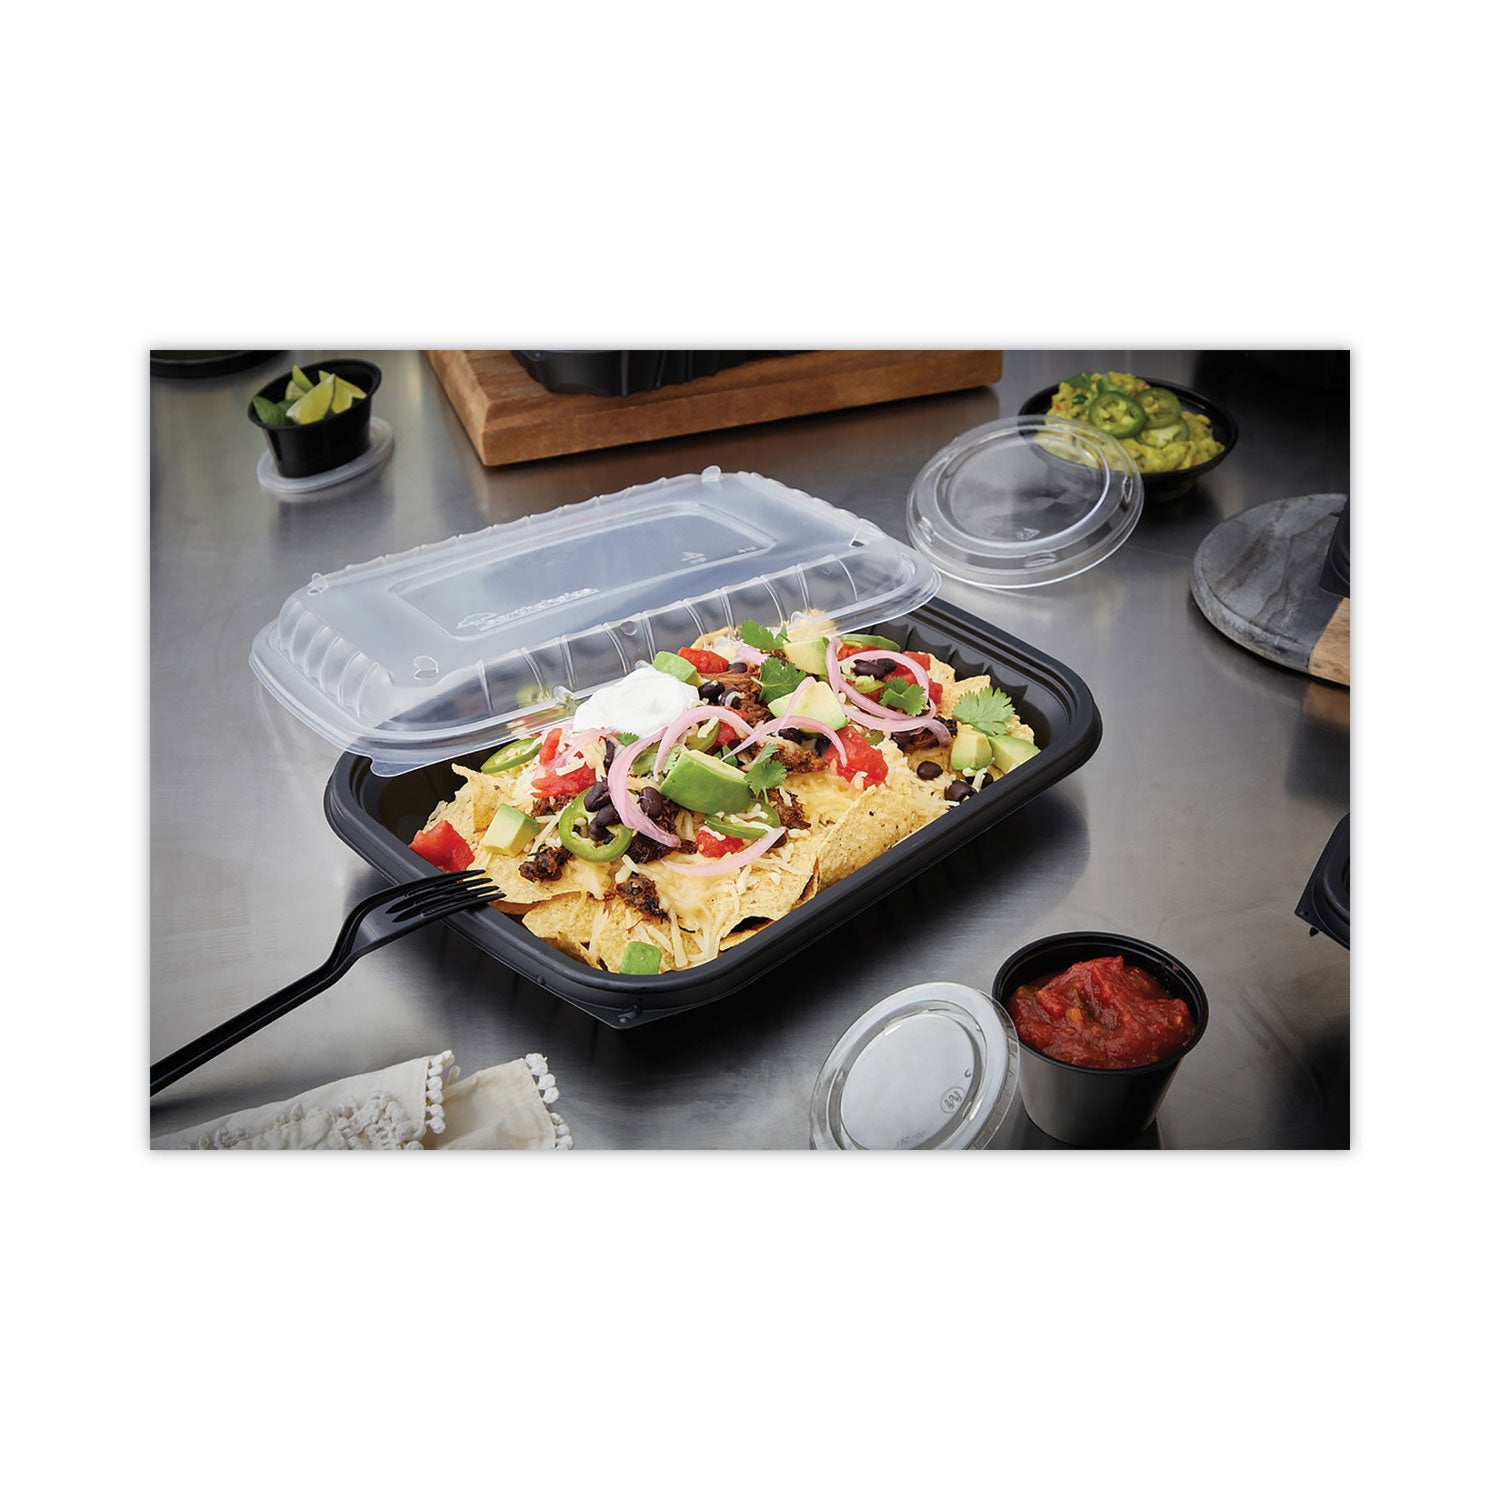 earthchoice-entree2go-takeout-container-48-oz-1175-x-875-x-161-black-plastic-200-carton_pctycnb12x94800 - 2